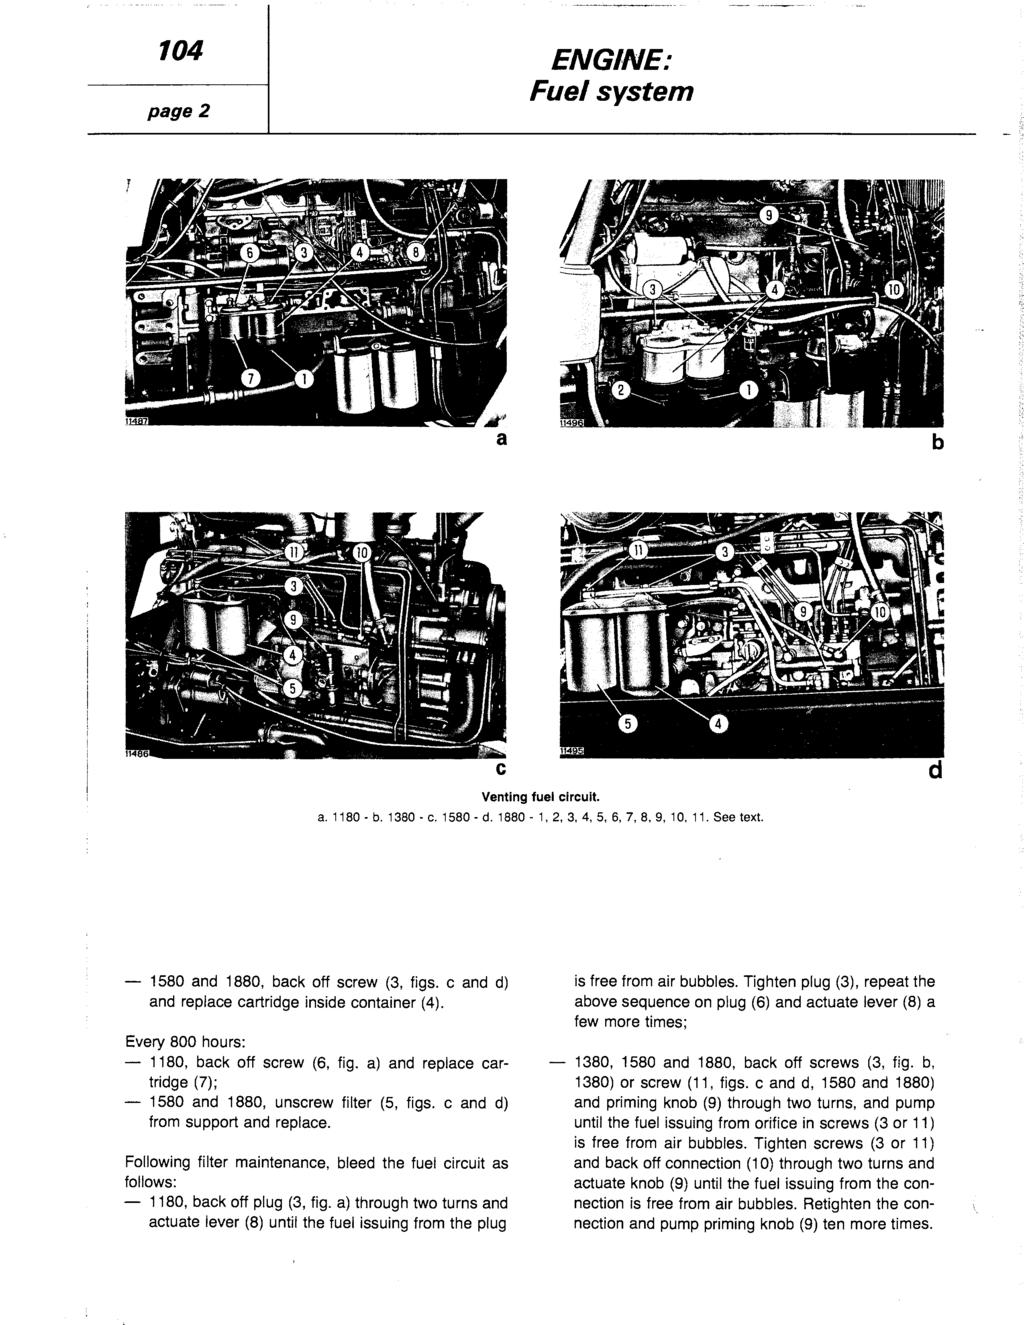 104 ENGINE: page2 Fuel system b C Venting fuel circuit. a.1180 b.1380 - c. 1580 d.1880-1, 2, 3, 4, 5, 6, 7, 8, 9, 10, 11. See text. - 1580 and 1880, back off screw (3, figs.